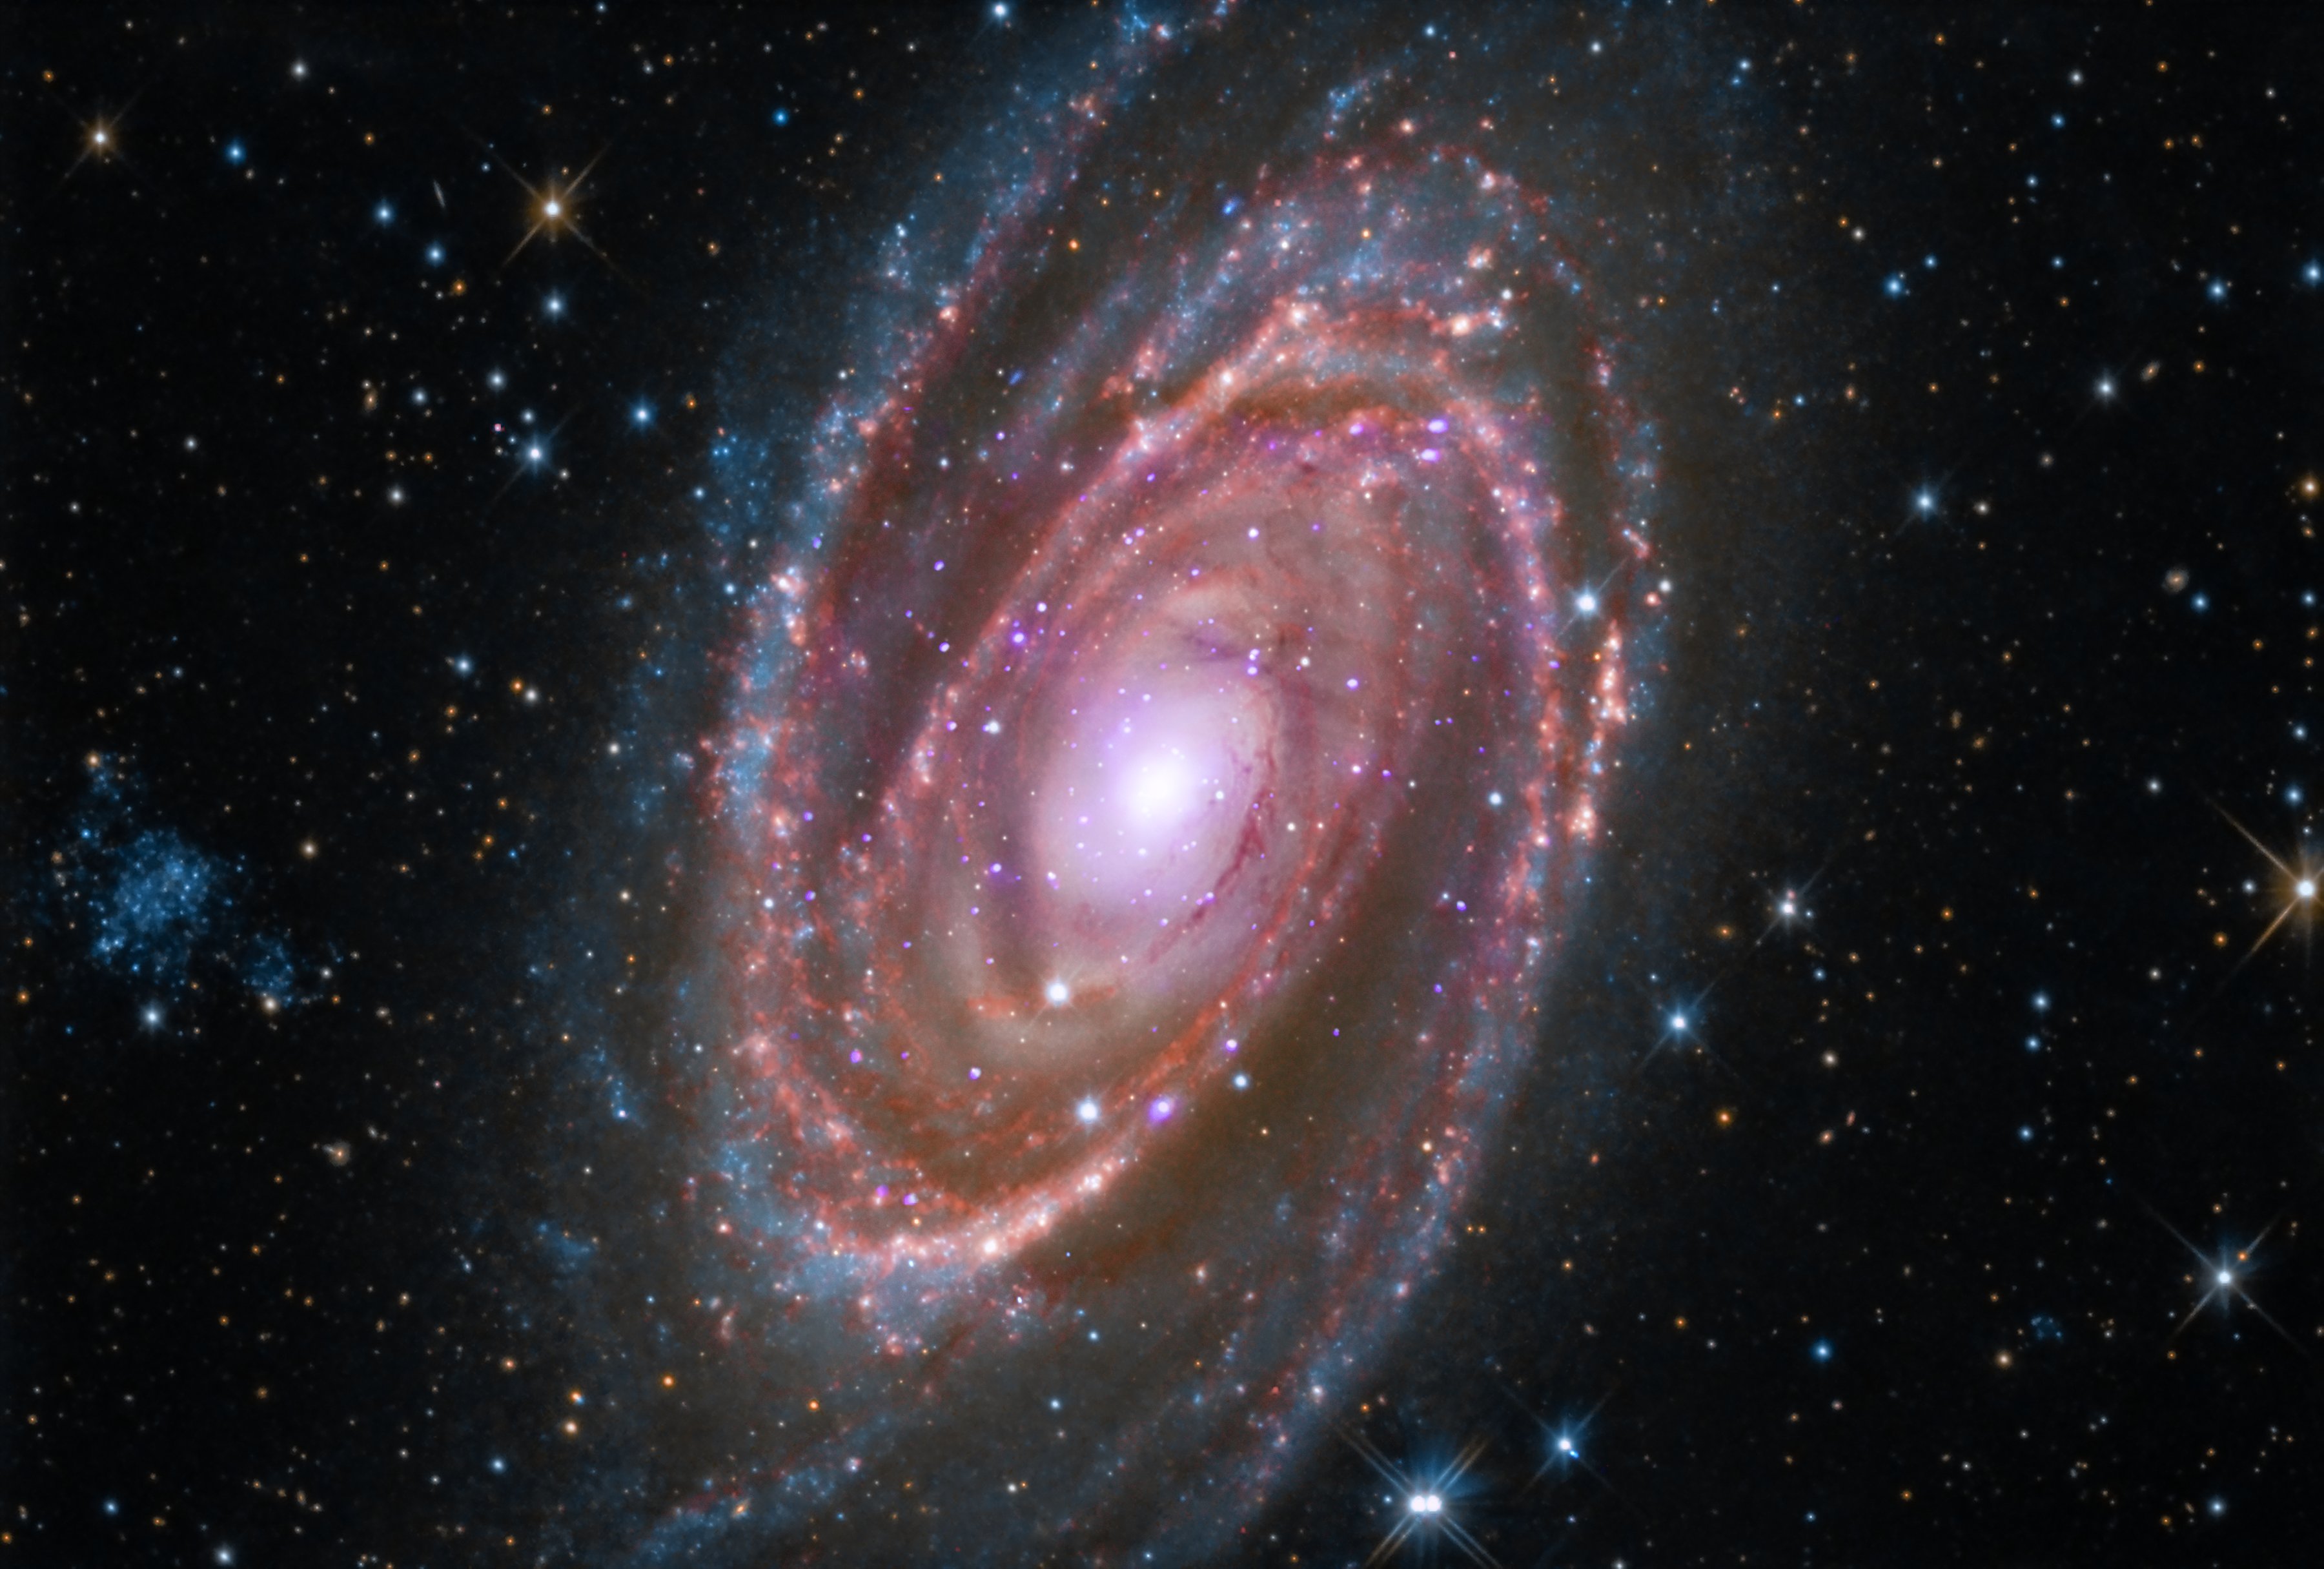 The spiral galaxy M81 is located about 12 million light-years away from Earth.